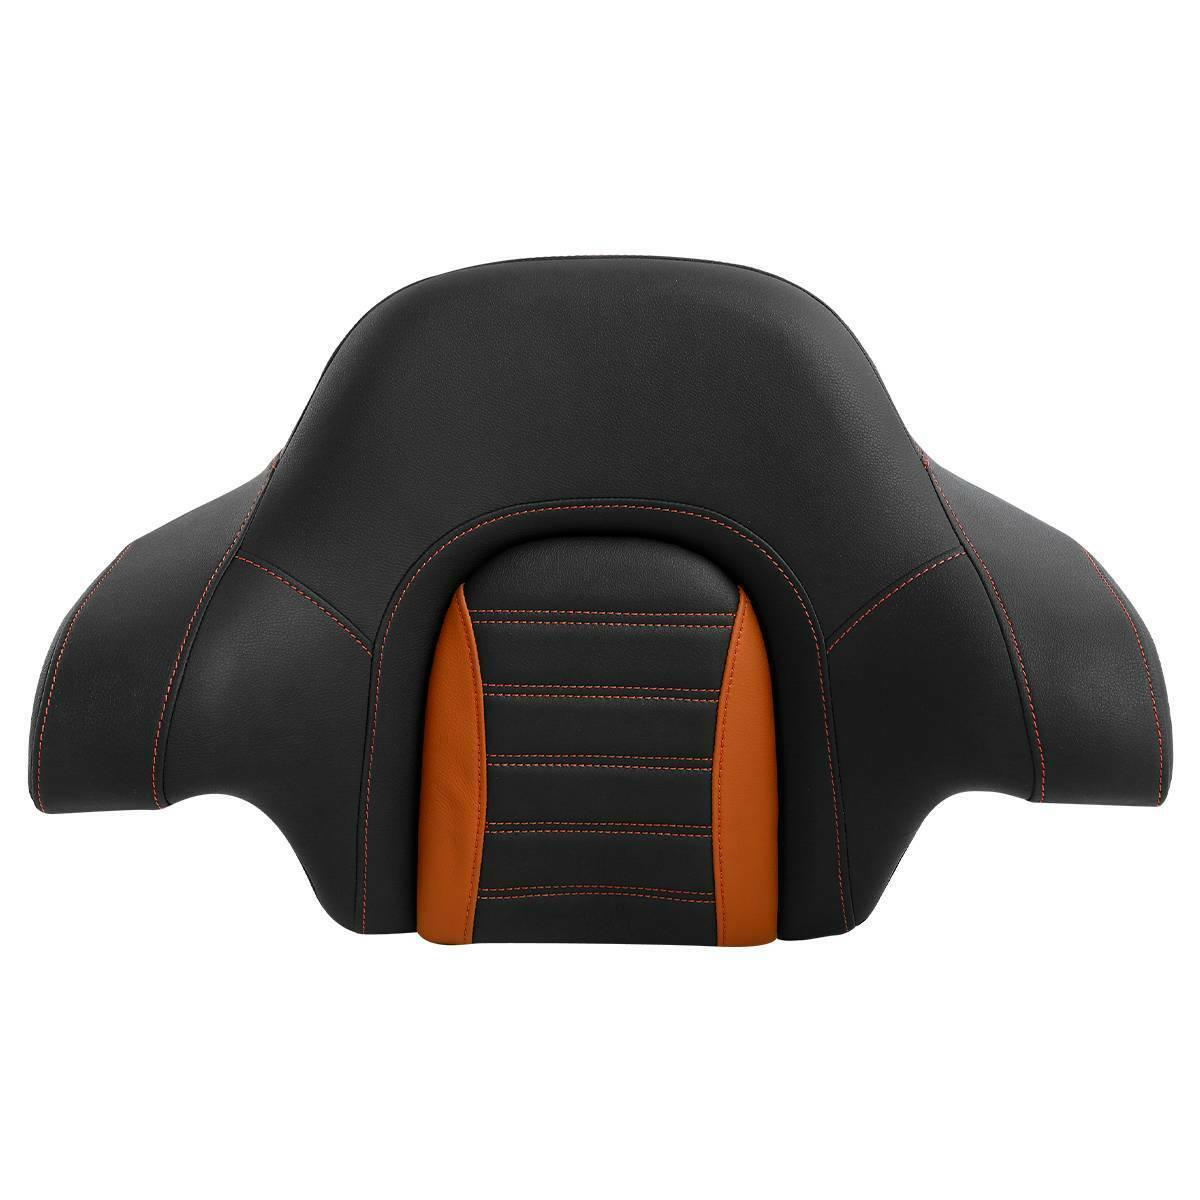 King Chopped Trunk Wrap Backrest Pad Fit For Harley Touring Street Glide 14-21 - Moto Life Products